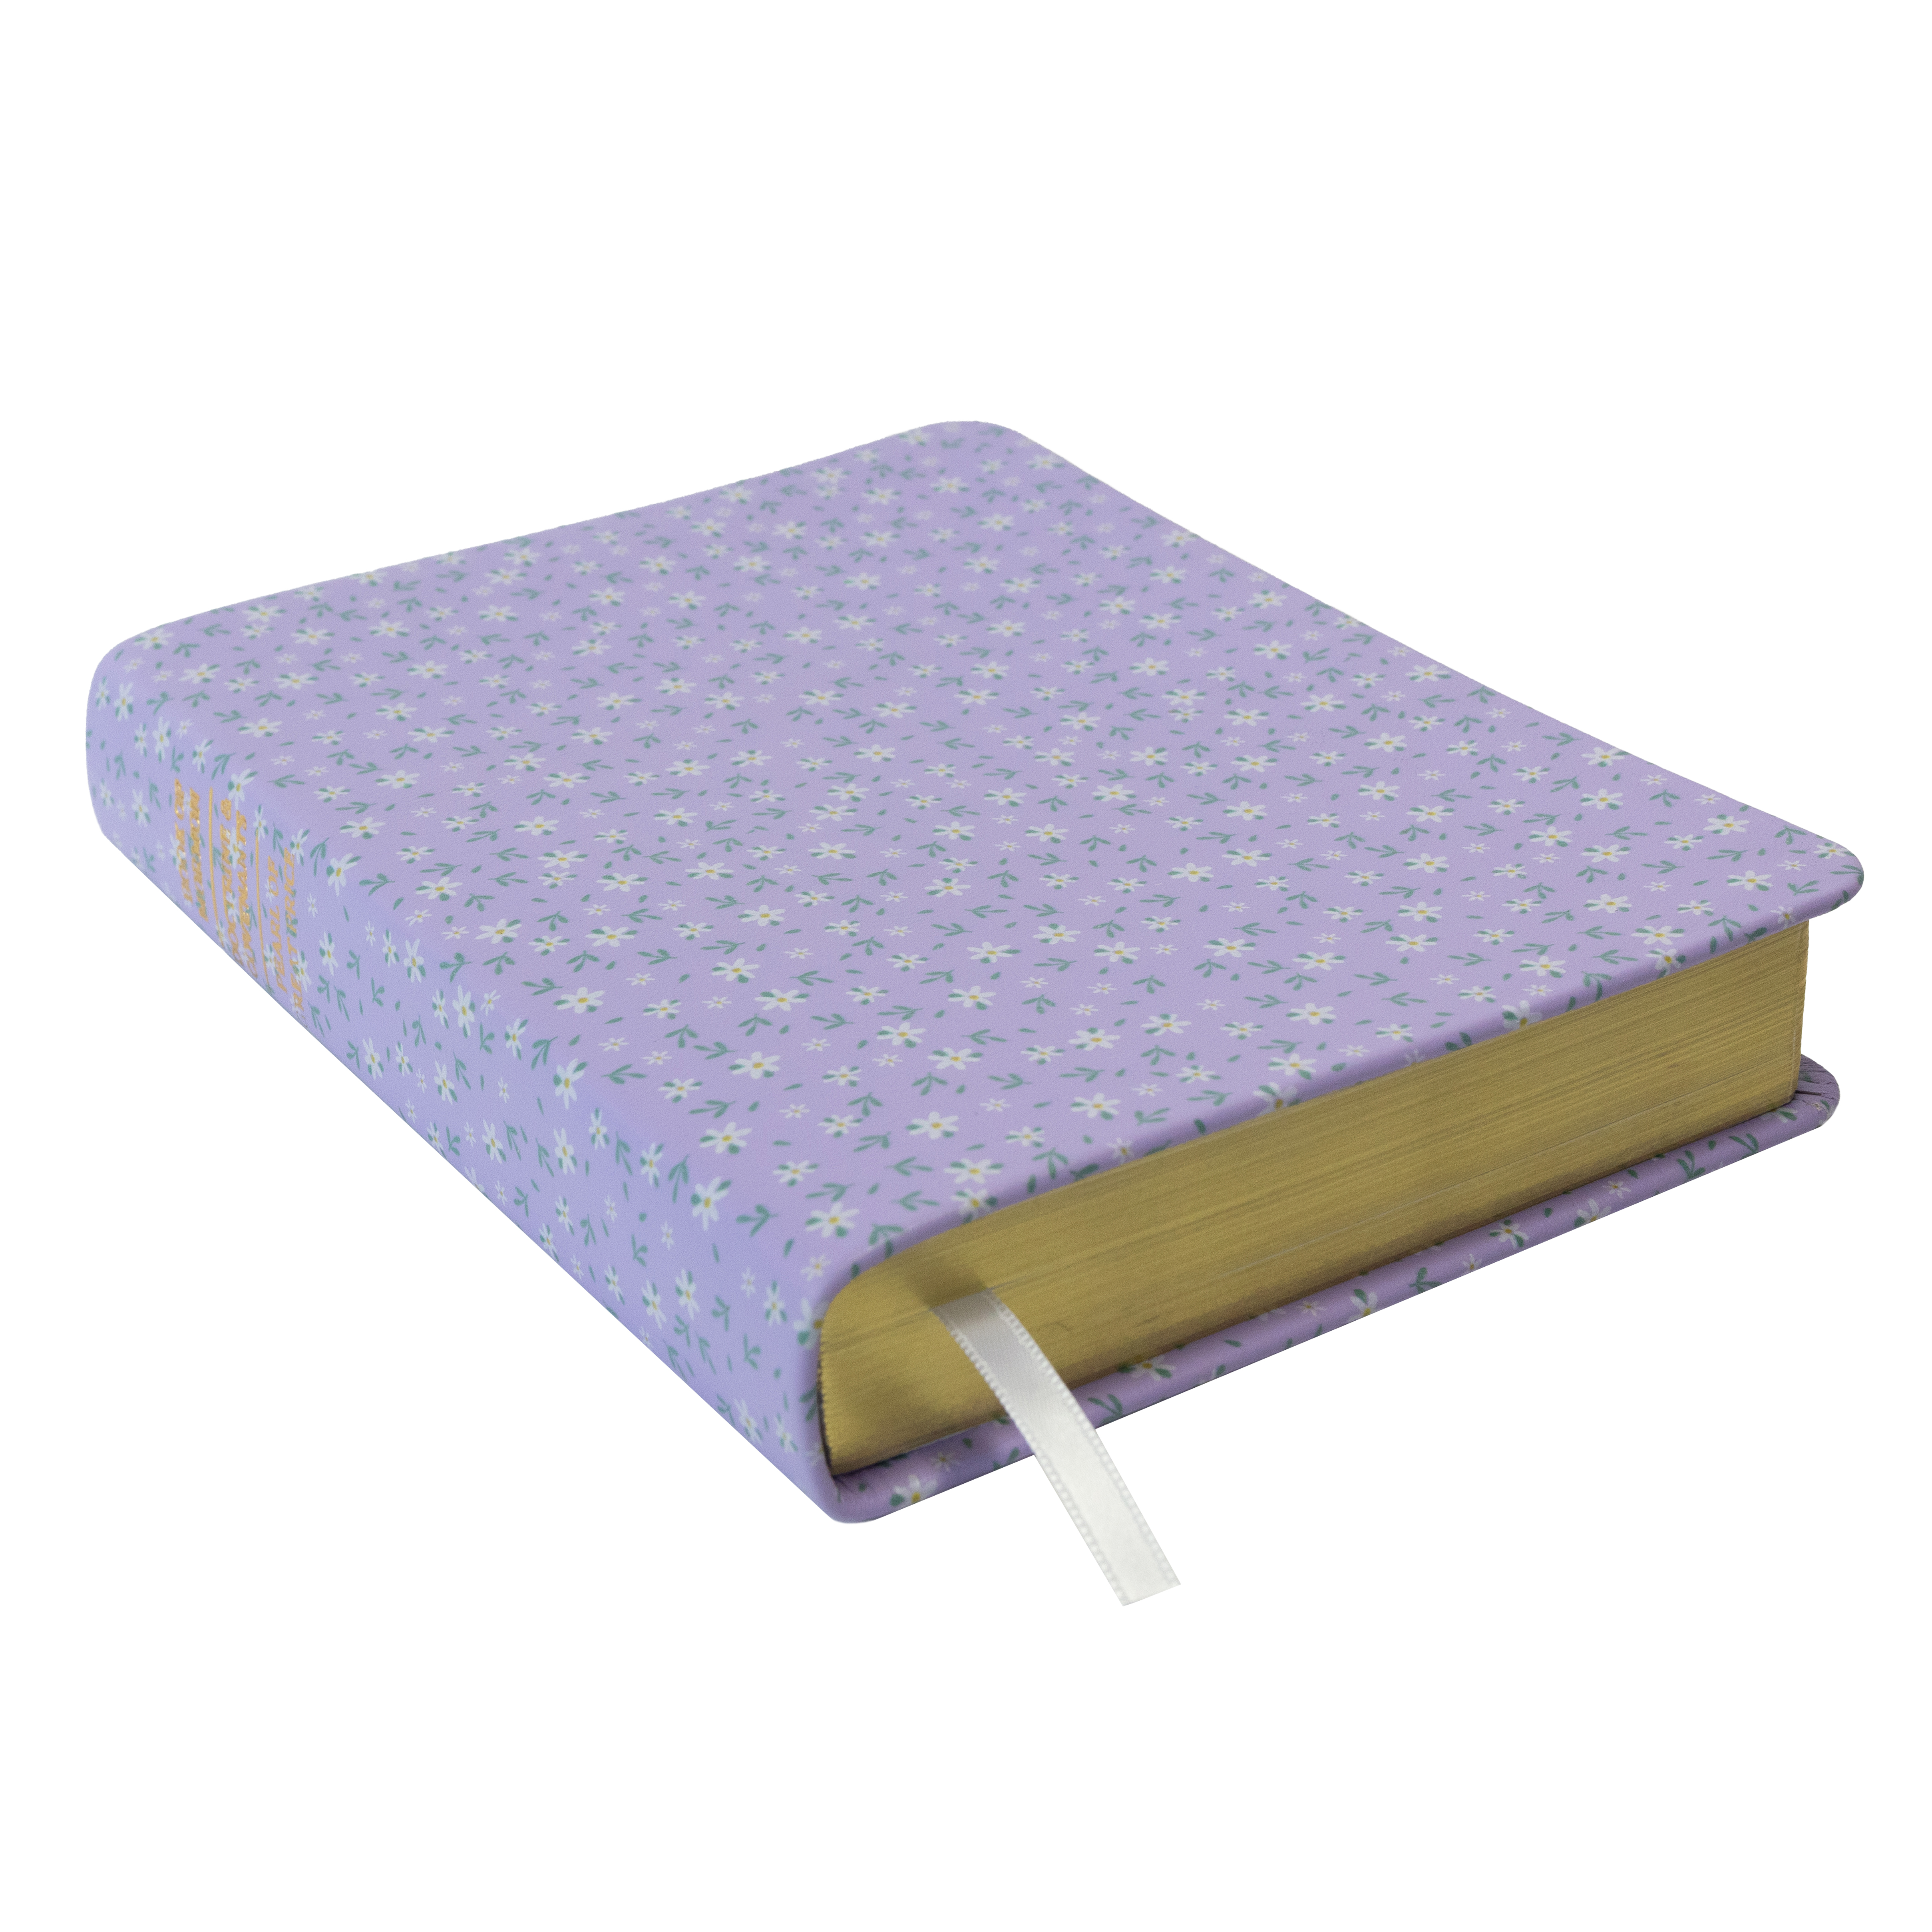 Hand-Bound Genuine Leather Triple - Daisy May (6 Colors)